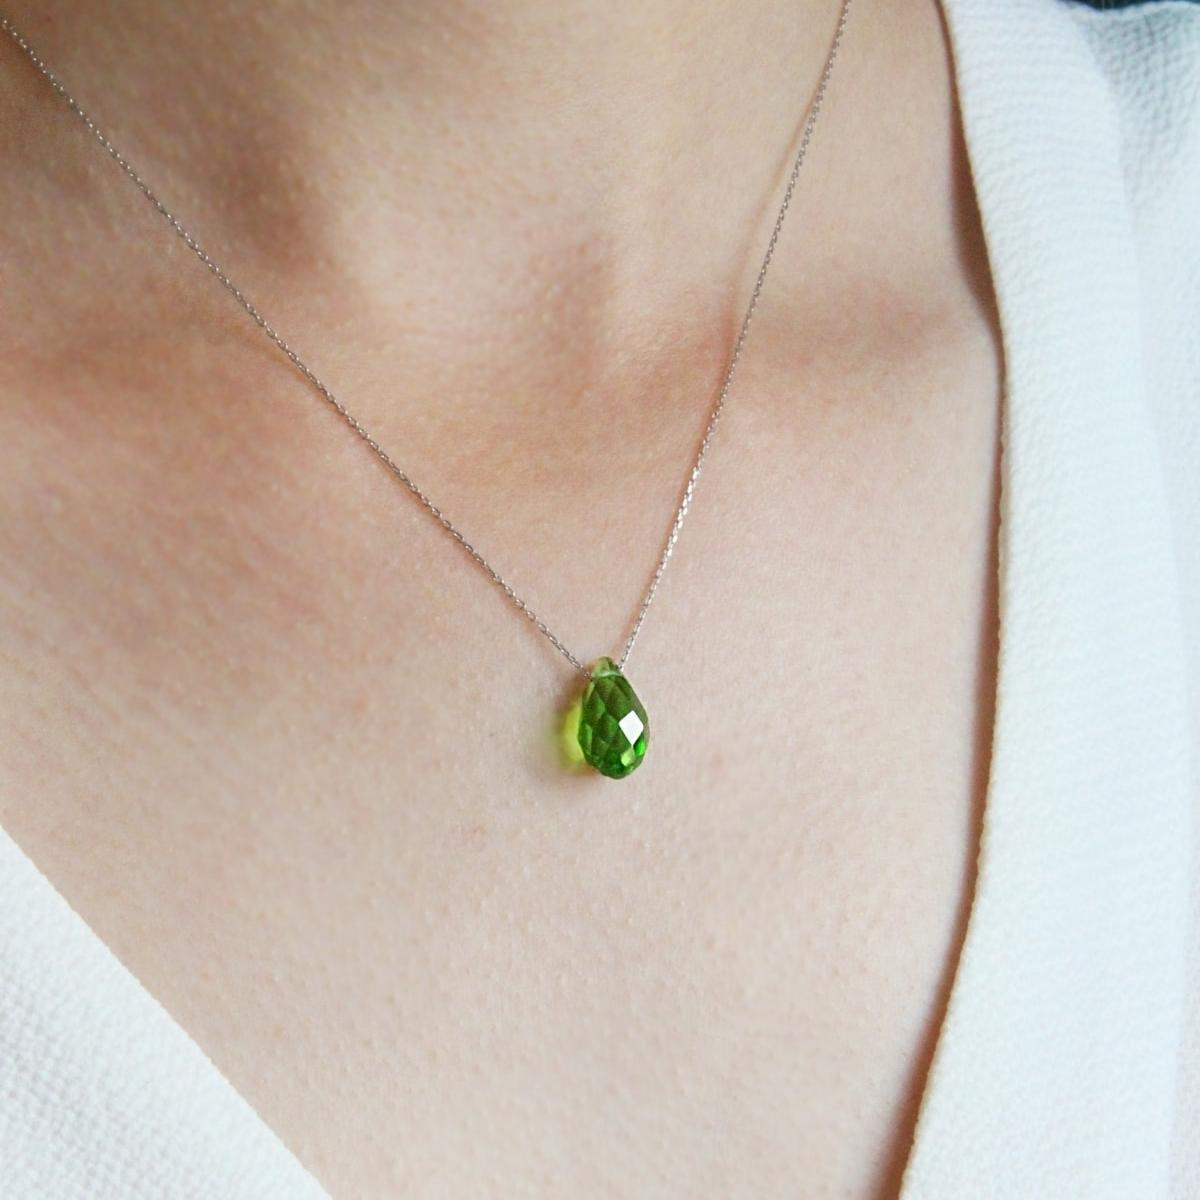 Peridot Pendant Necklace • August Birthstone Jewelry • Gift For Her - Trending Silver Gifts